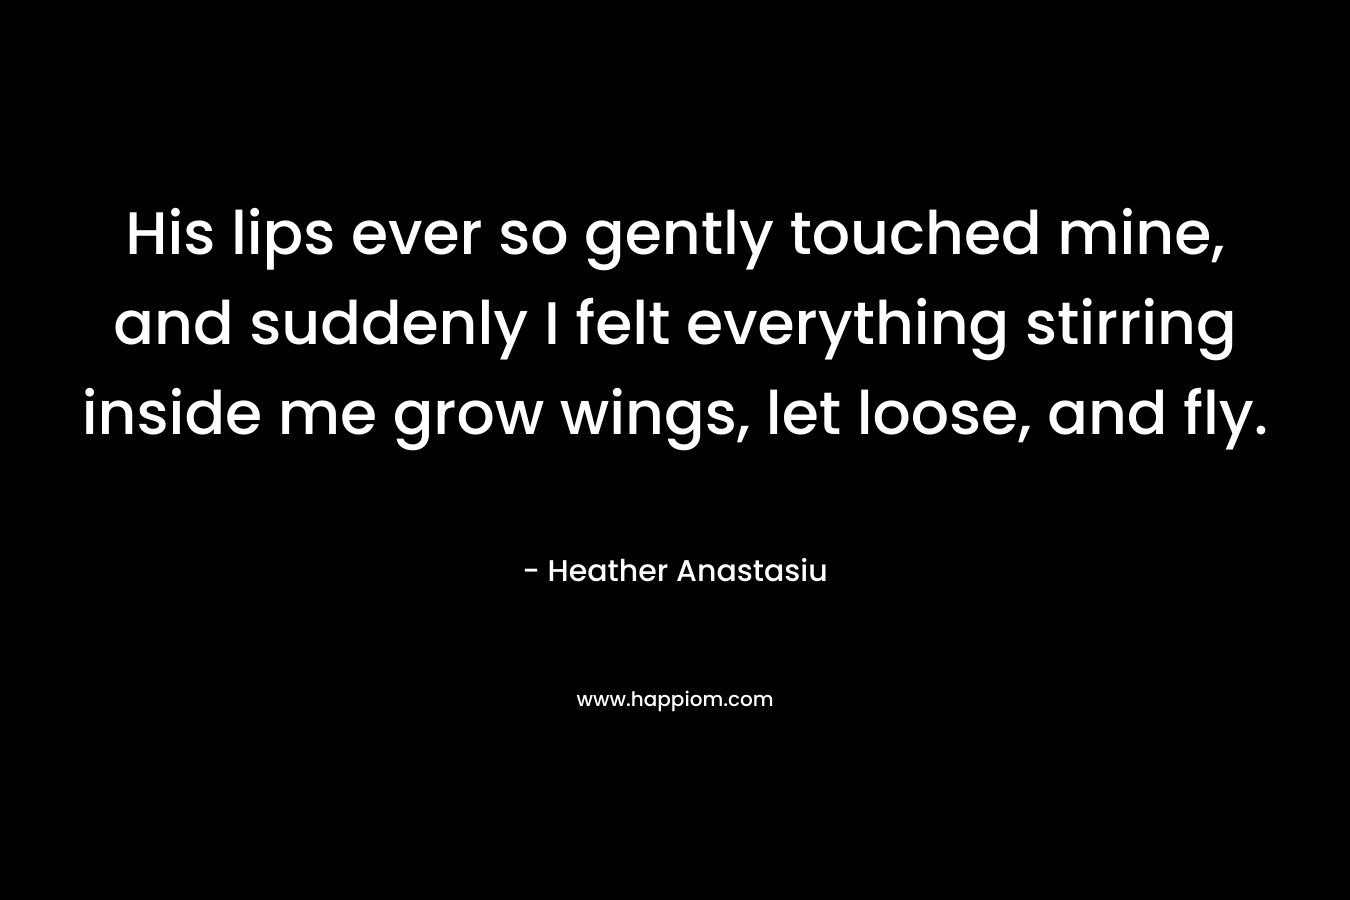 His lips ever so gently touched mine, and suddenly I felt everything stirring inside me grow wings, let loose, and fly.